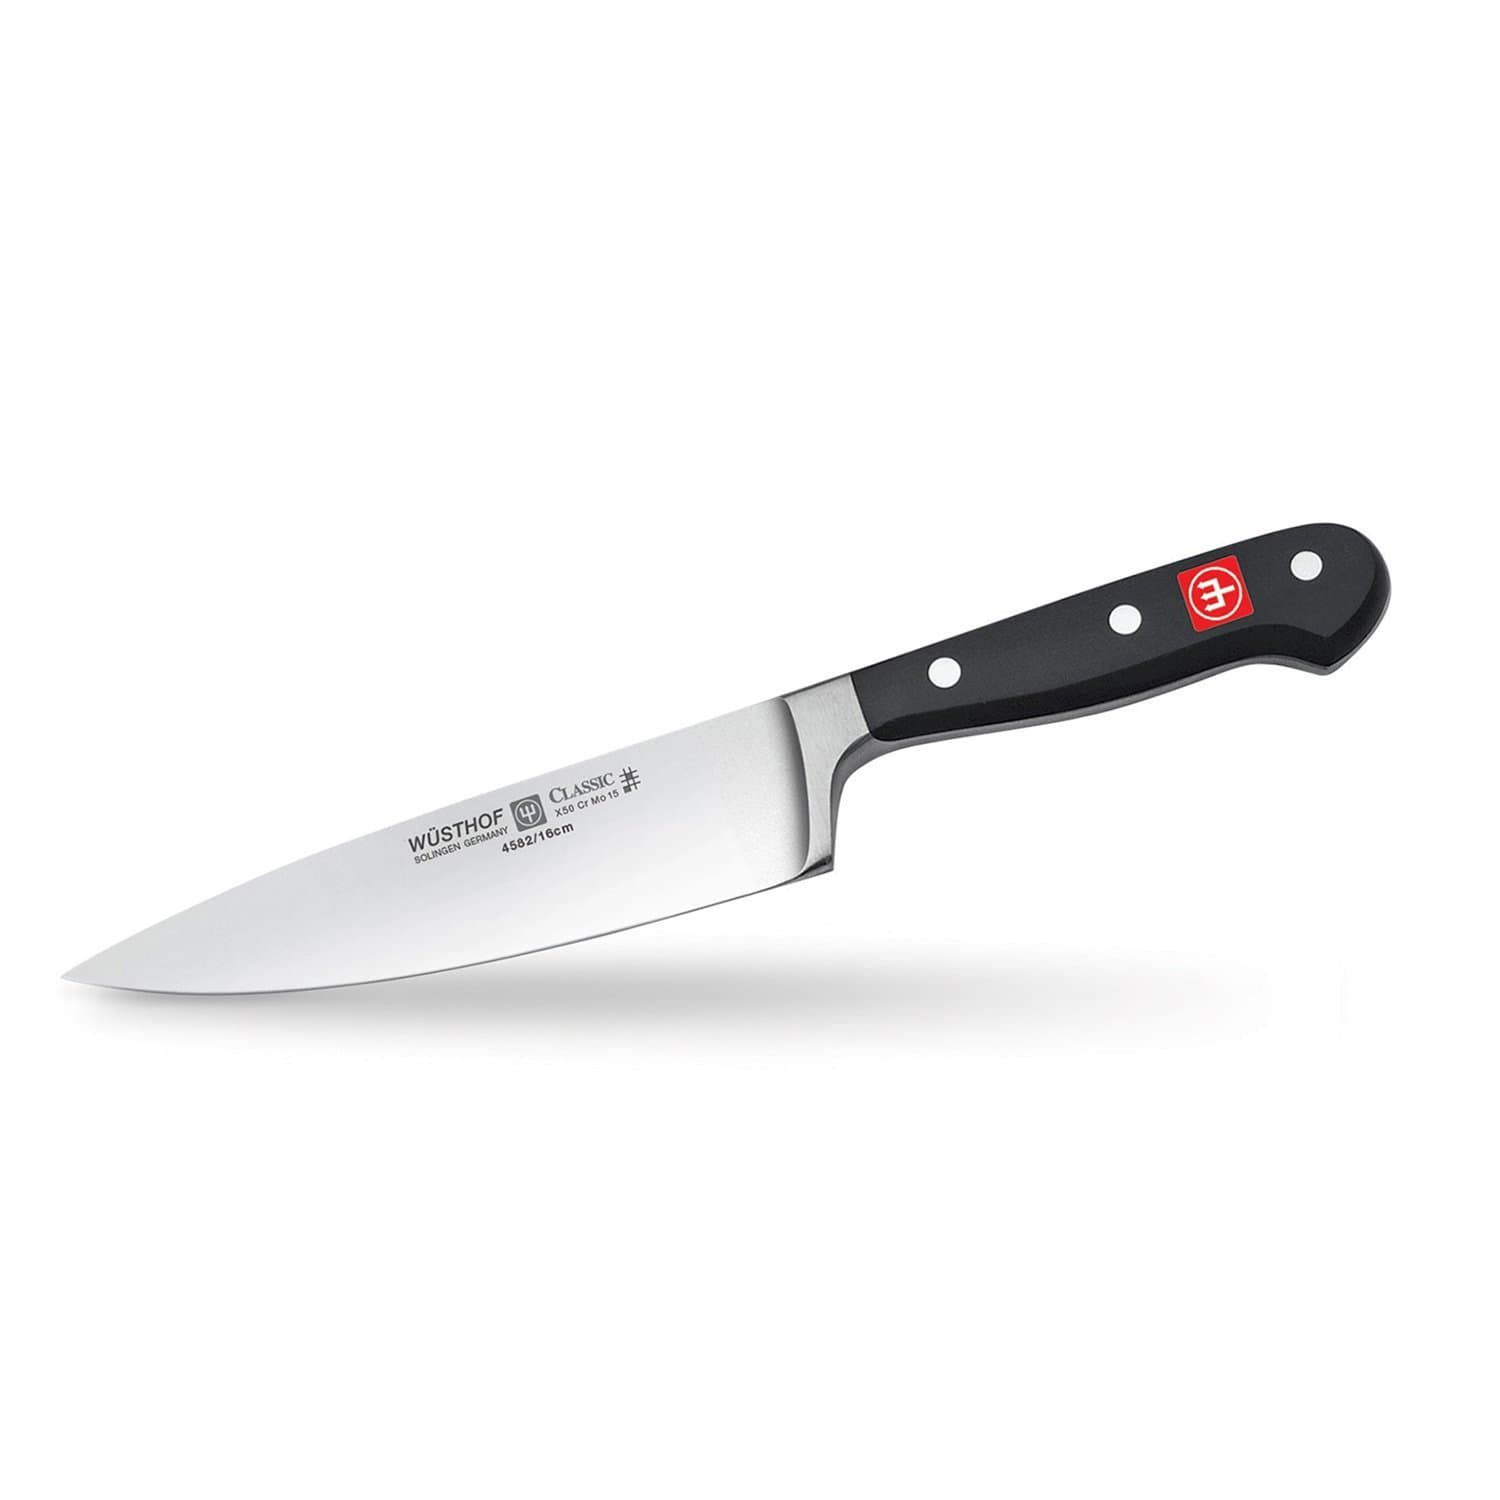 Wusthof Classic Cooks Knife - Black and Silver, 6 inch - 979779 - Jashanmal Home